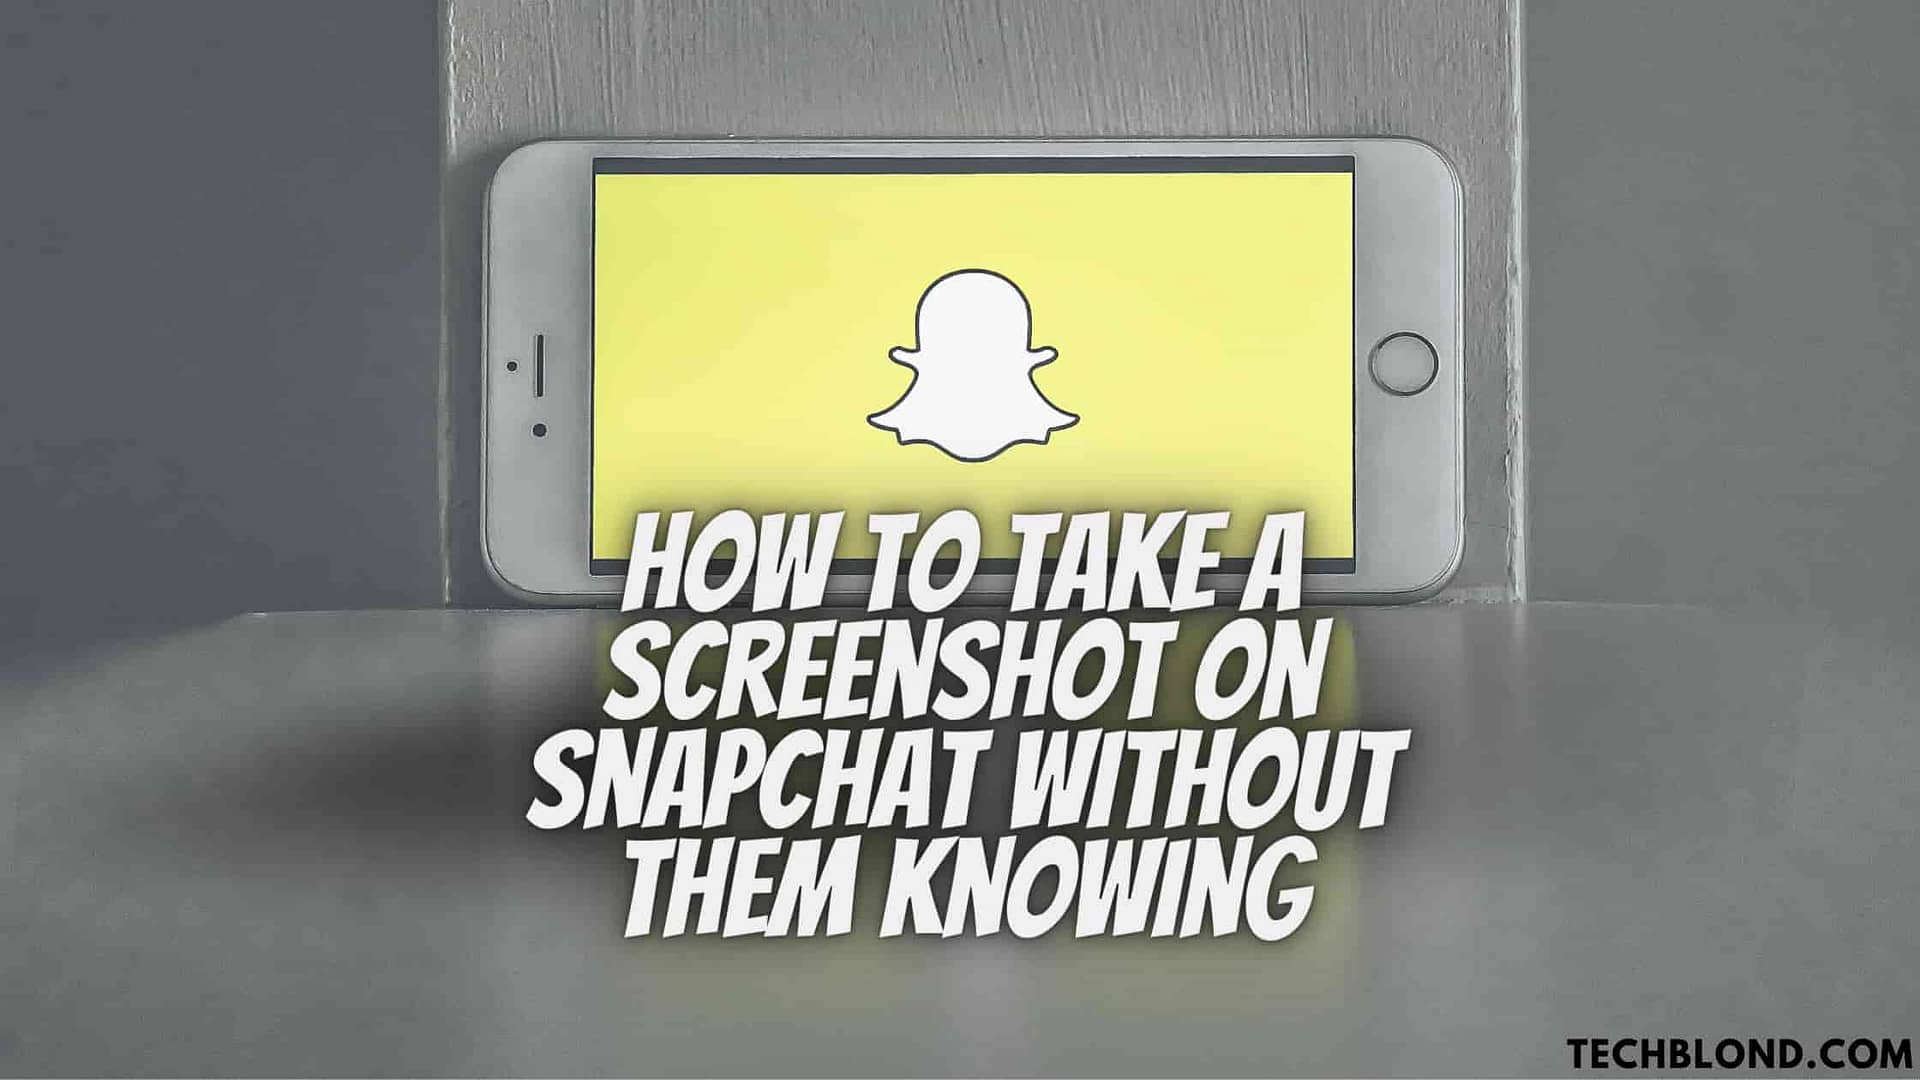 How to Take a Screenshot on Snapchat Without Them Knowing